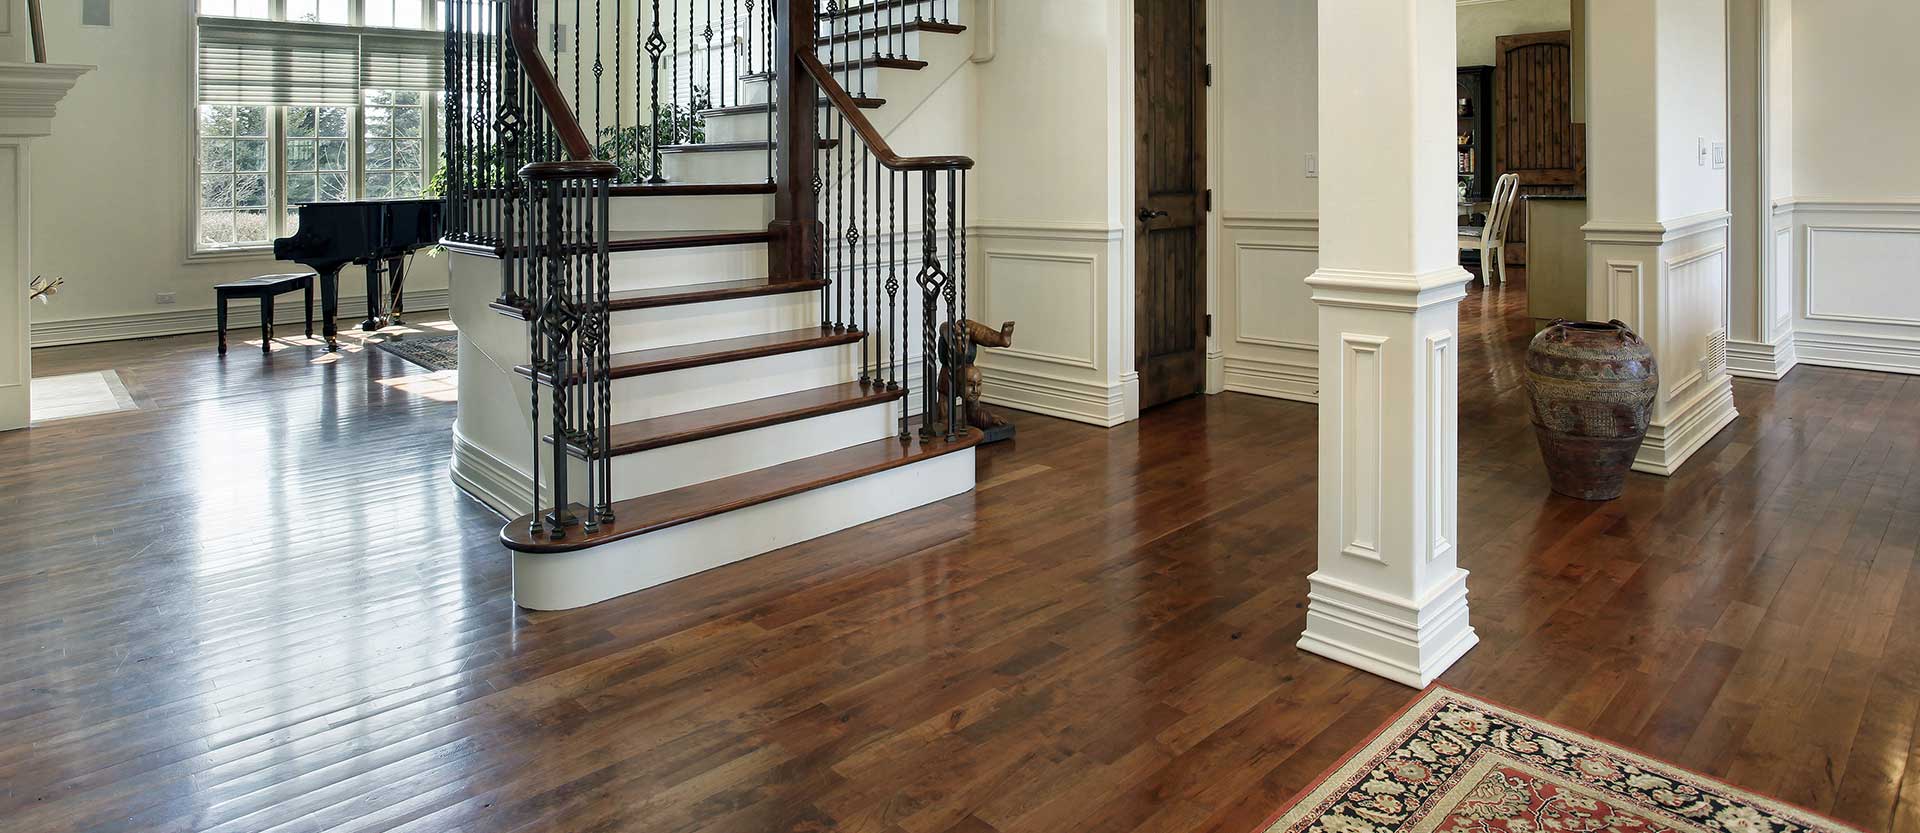 Walnut Floors: Trendy or a Good Investment?